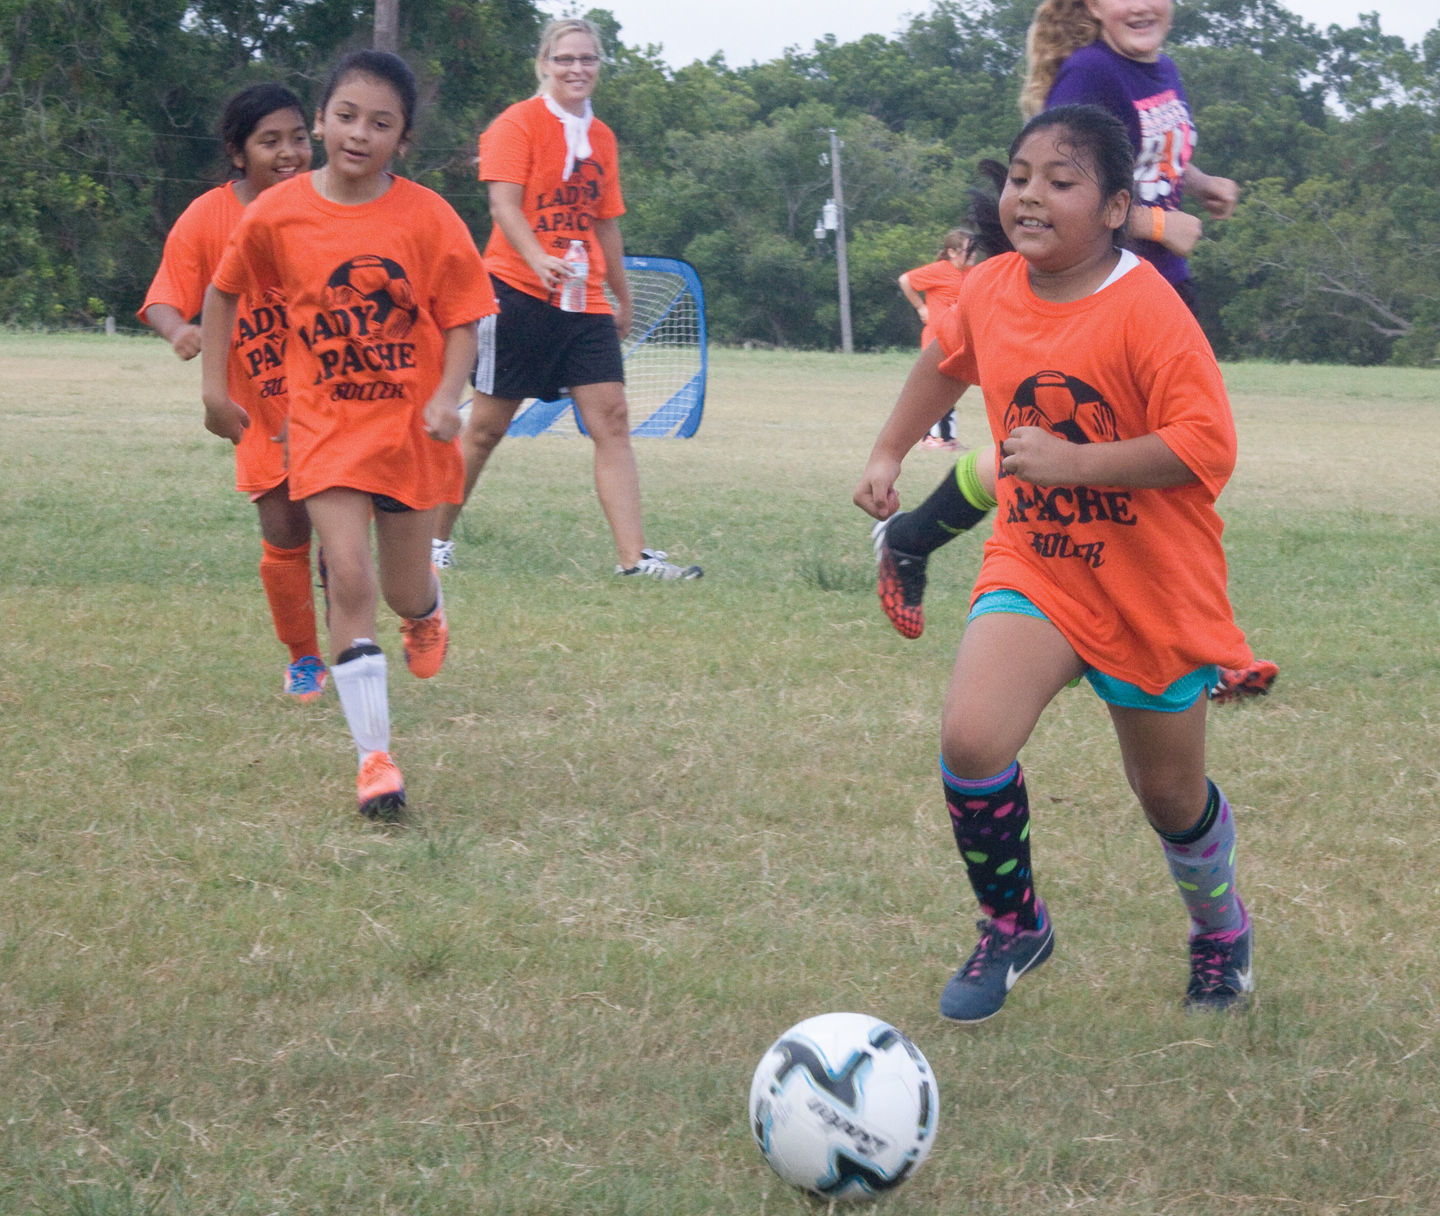 Coaches Jenna Philips and Robert Addington ran a youth girls’ soccer camp this week to get kids out there and handling soccer balls. Philips hopes to involve the local youth league next year so that even more athletes are involved in the camp.